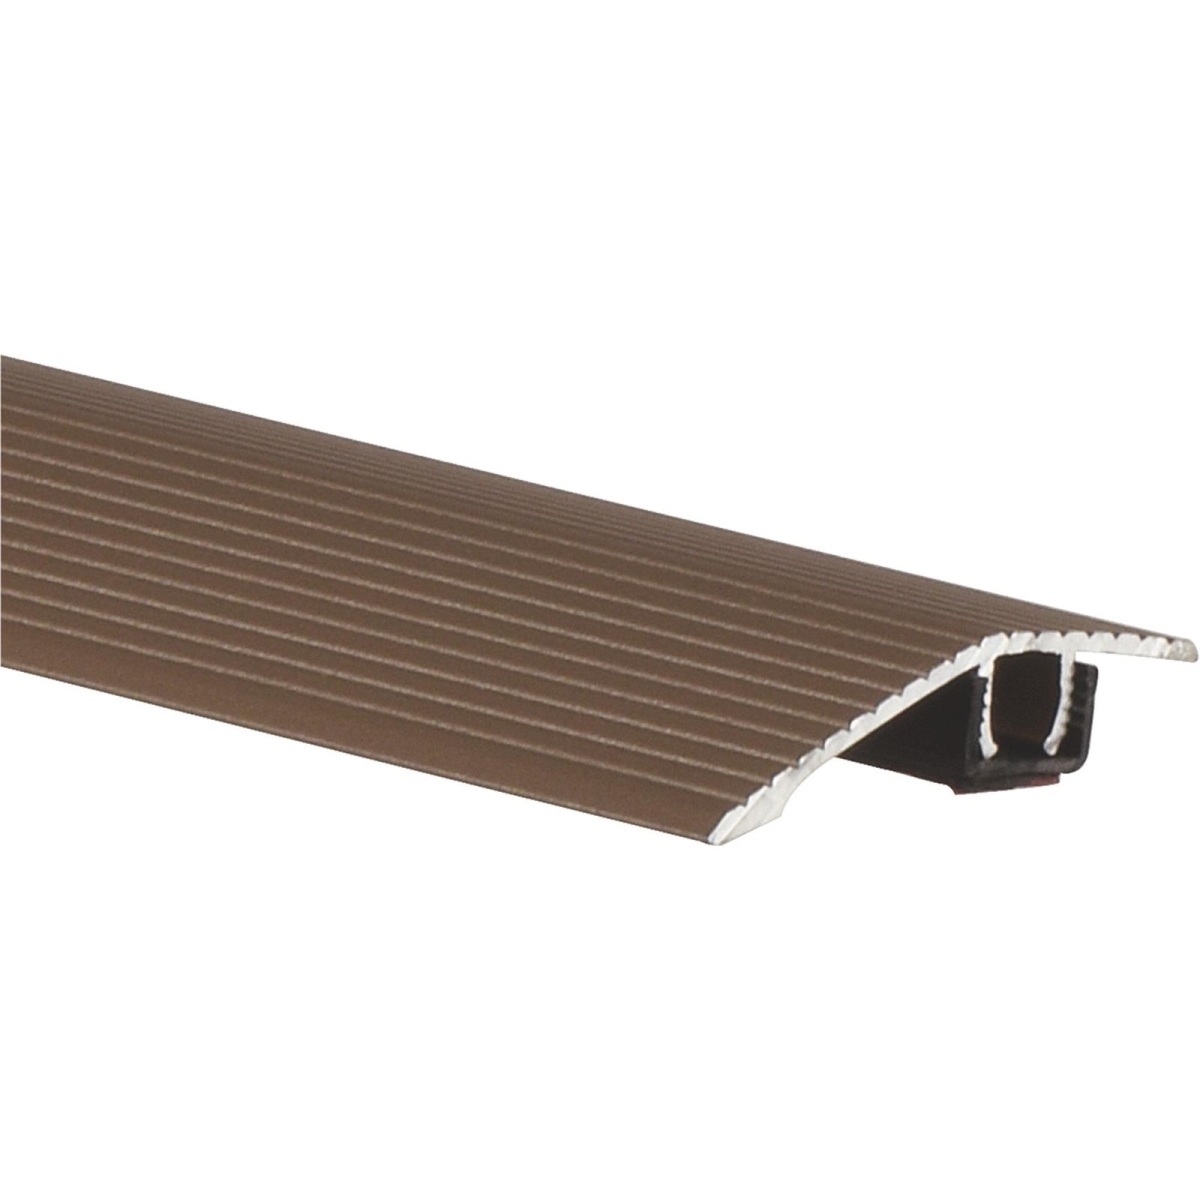 Thermwell 249001 1-0.81 X 36 In. Frost King Reducer Floor Transition, Satin Cocoa